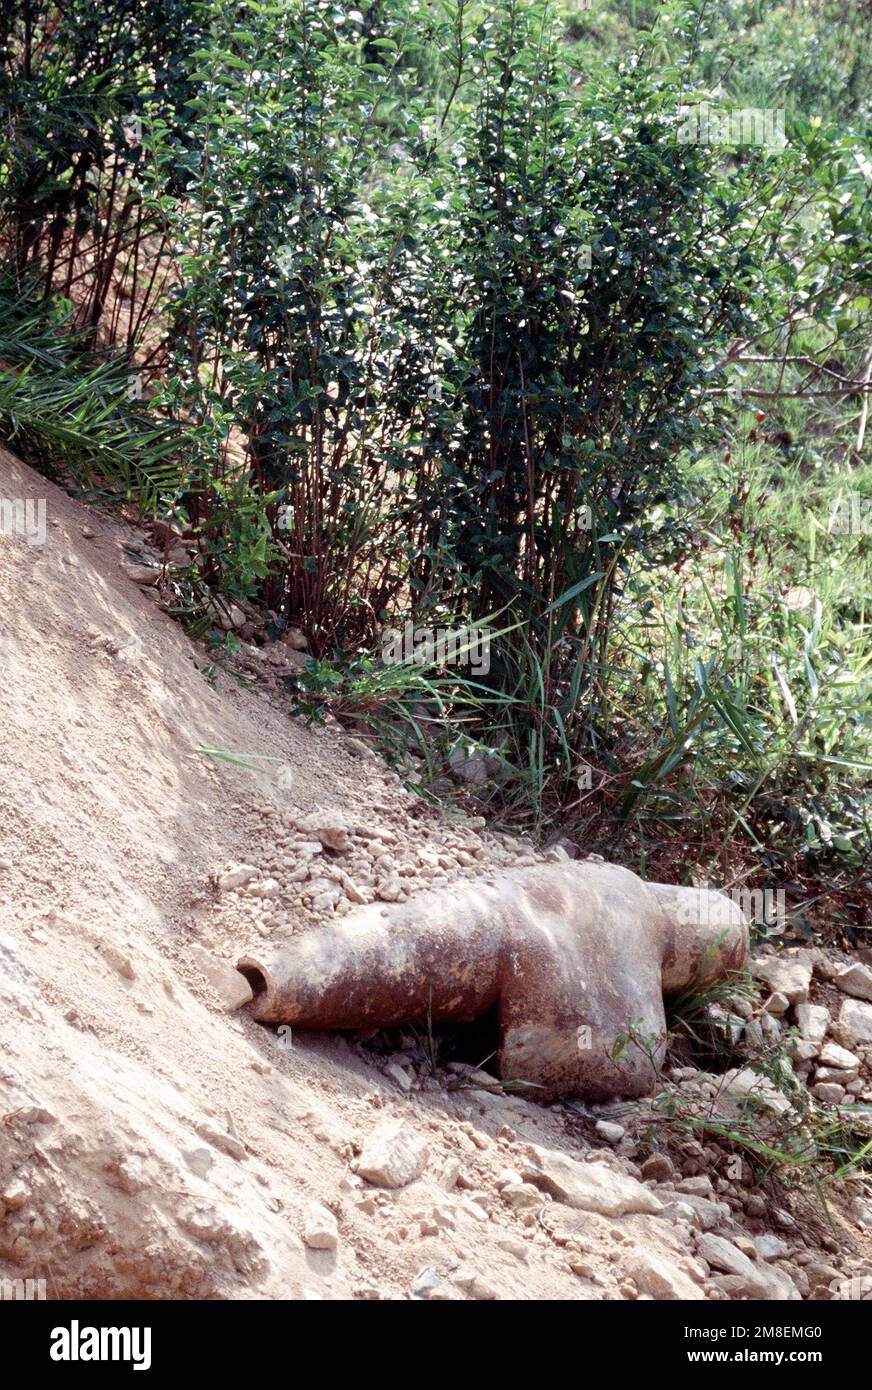 The remains of a bomb lie near an aircraft crash site on Dong Nua Mountain, Quang Binh Province. Members of a joint U.S./Vietnamese anthropological team are working in the area in an effort to locate remains of American soldiers listed as missing in action (MIA).. Country: Viet Nam(VNM) Stock Photo